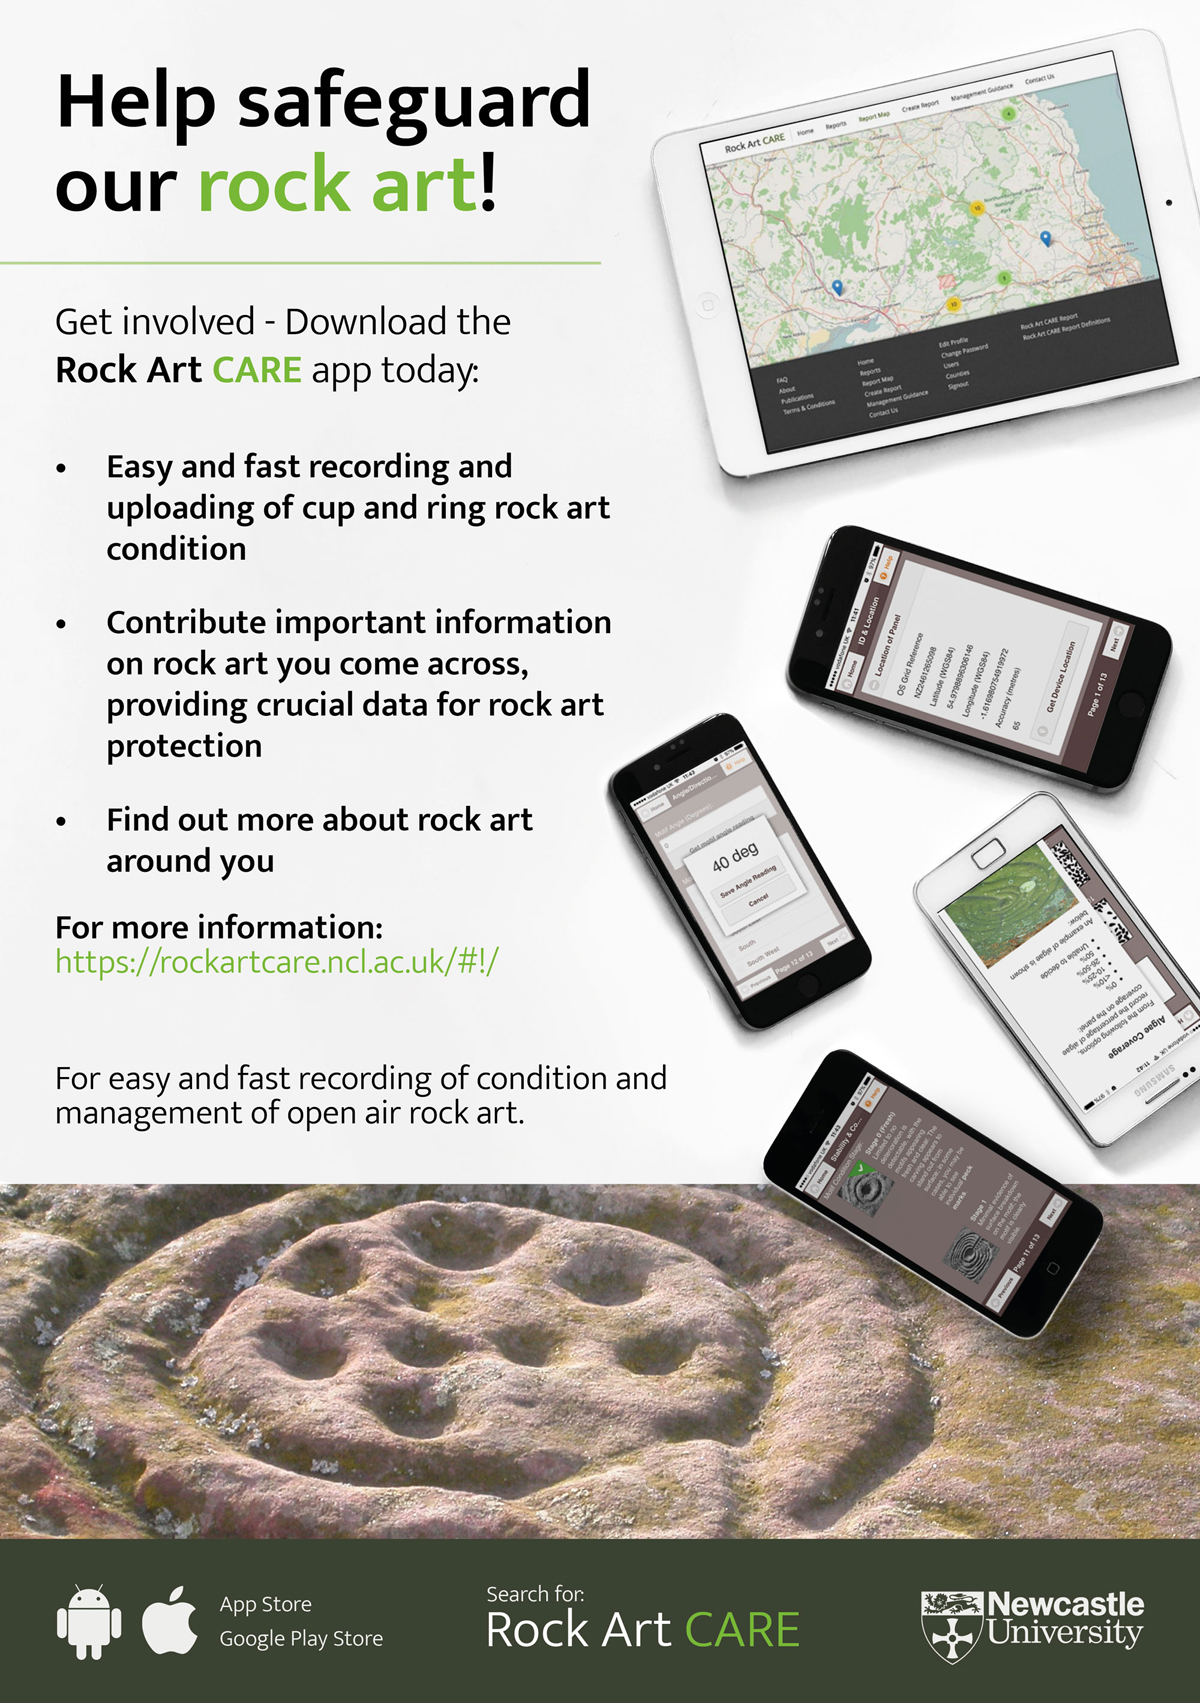 Rock Art Safeguarding: using a mobile app to get the job done